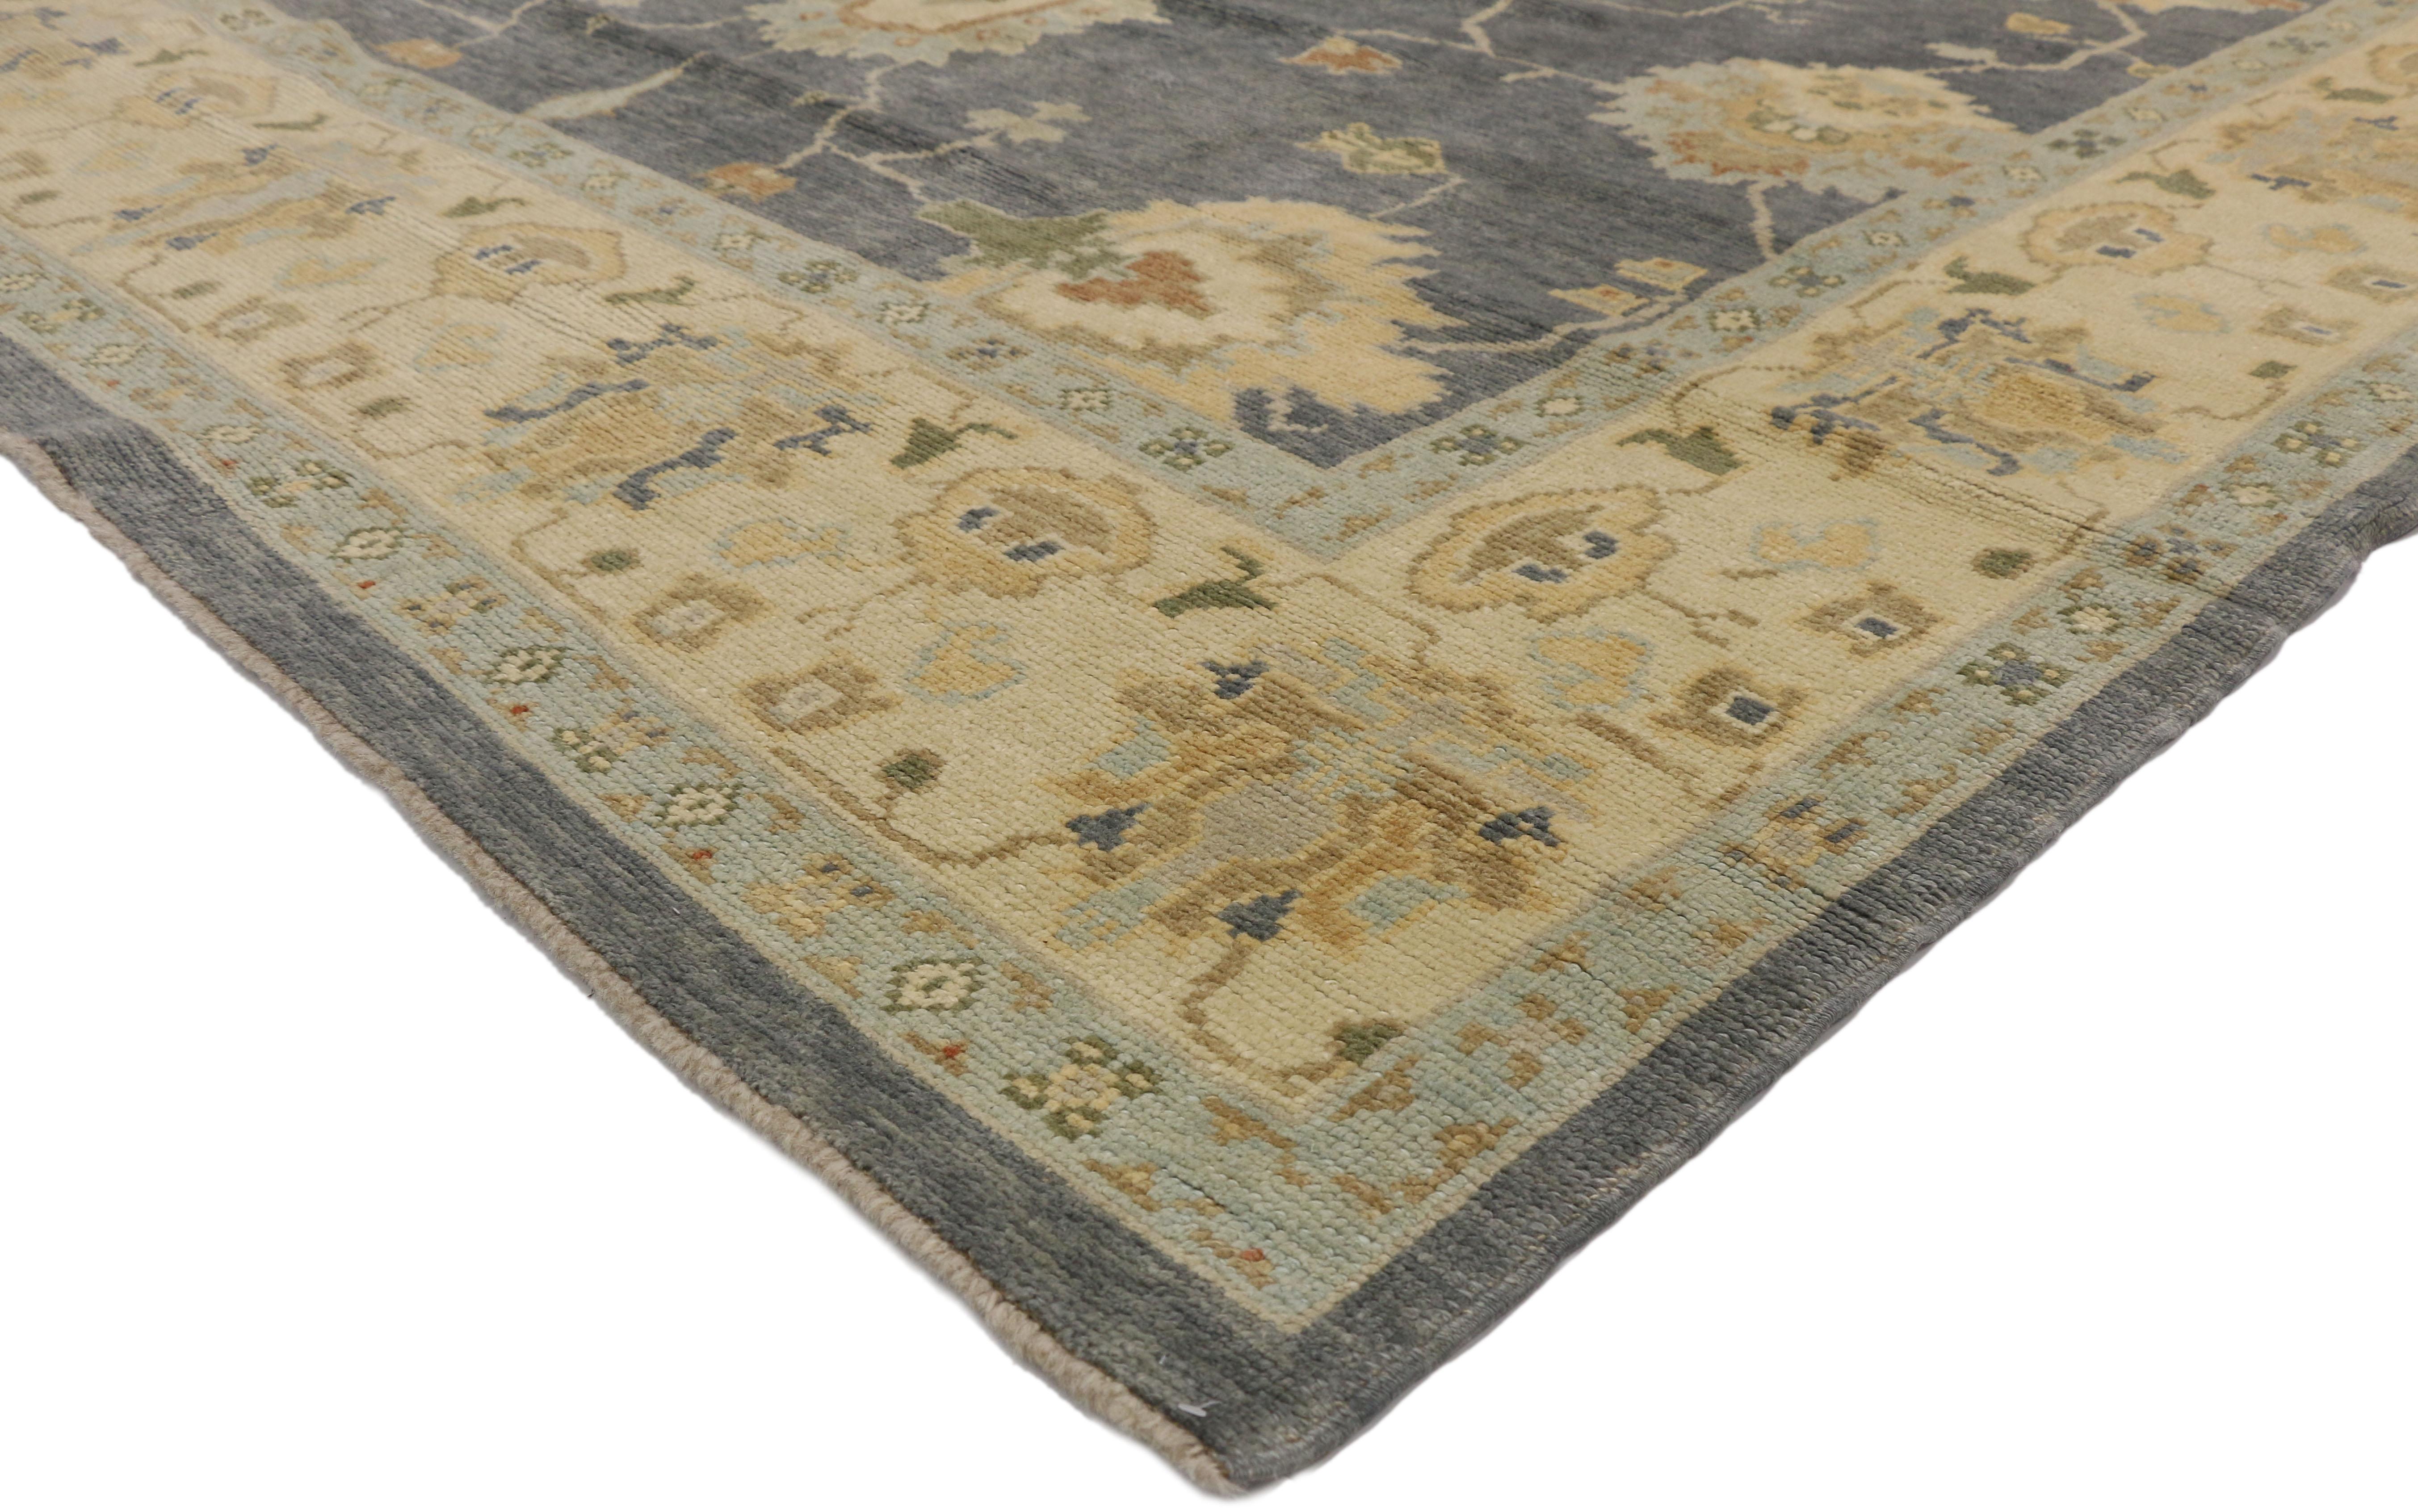 50730, new contemporary Turkish Oushak Area rug with Transitional style. This hand knotted wool contemporary Turkish Oushak area rug features an all-over geometric pattern composed of Harshang-style motifs, blooming palmettes, leafy tendrils,